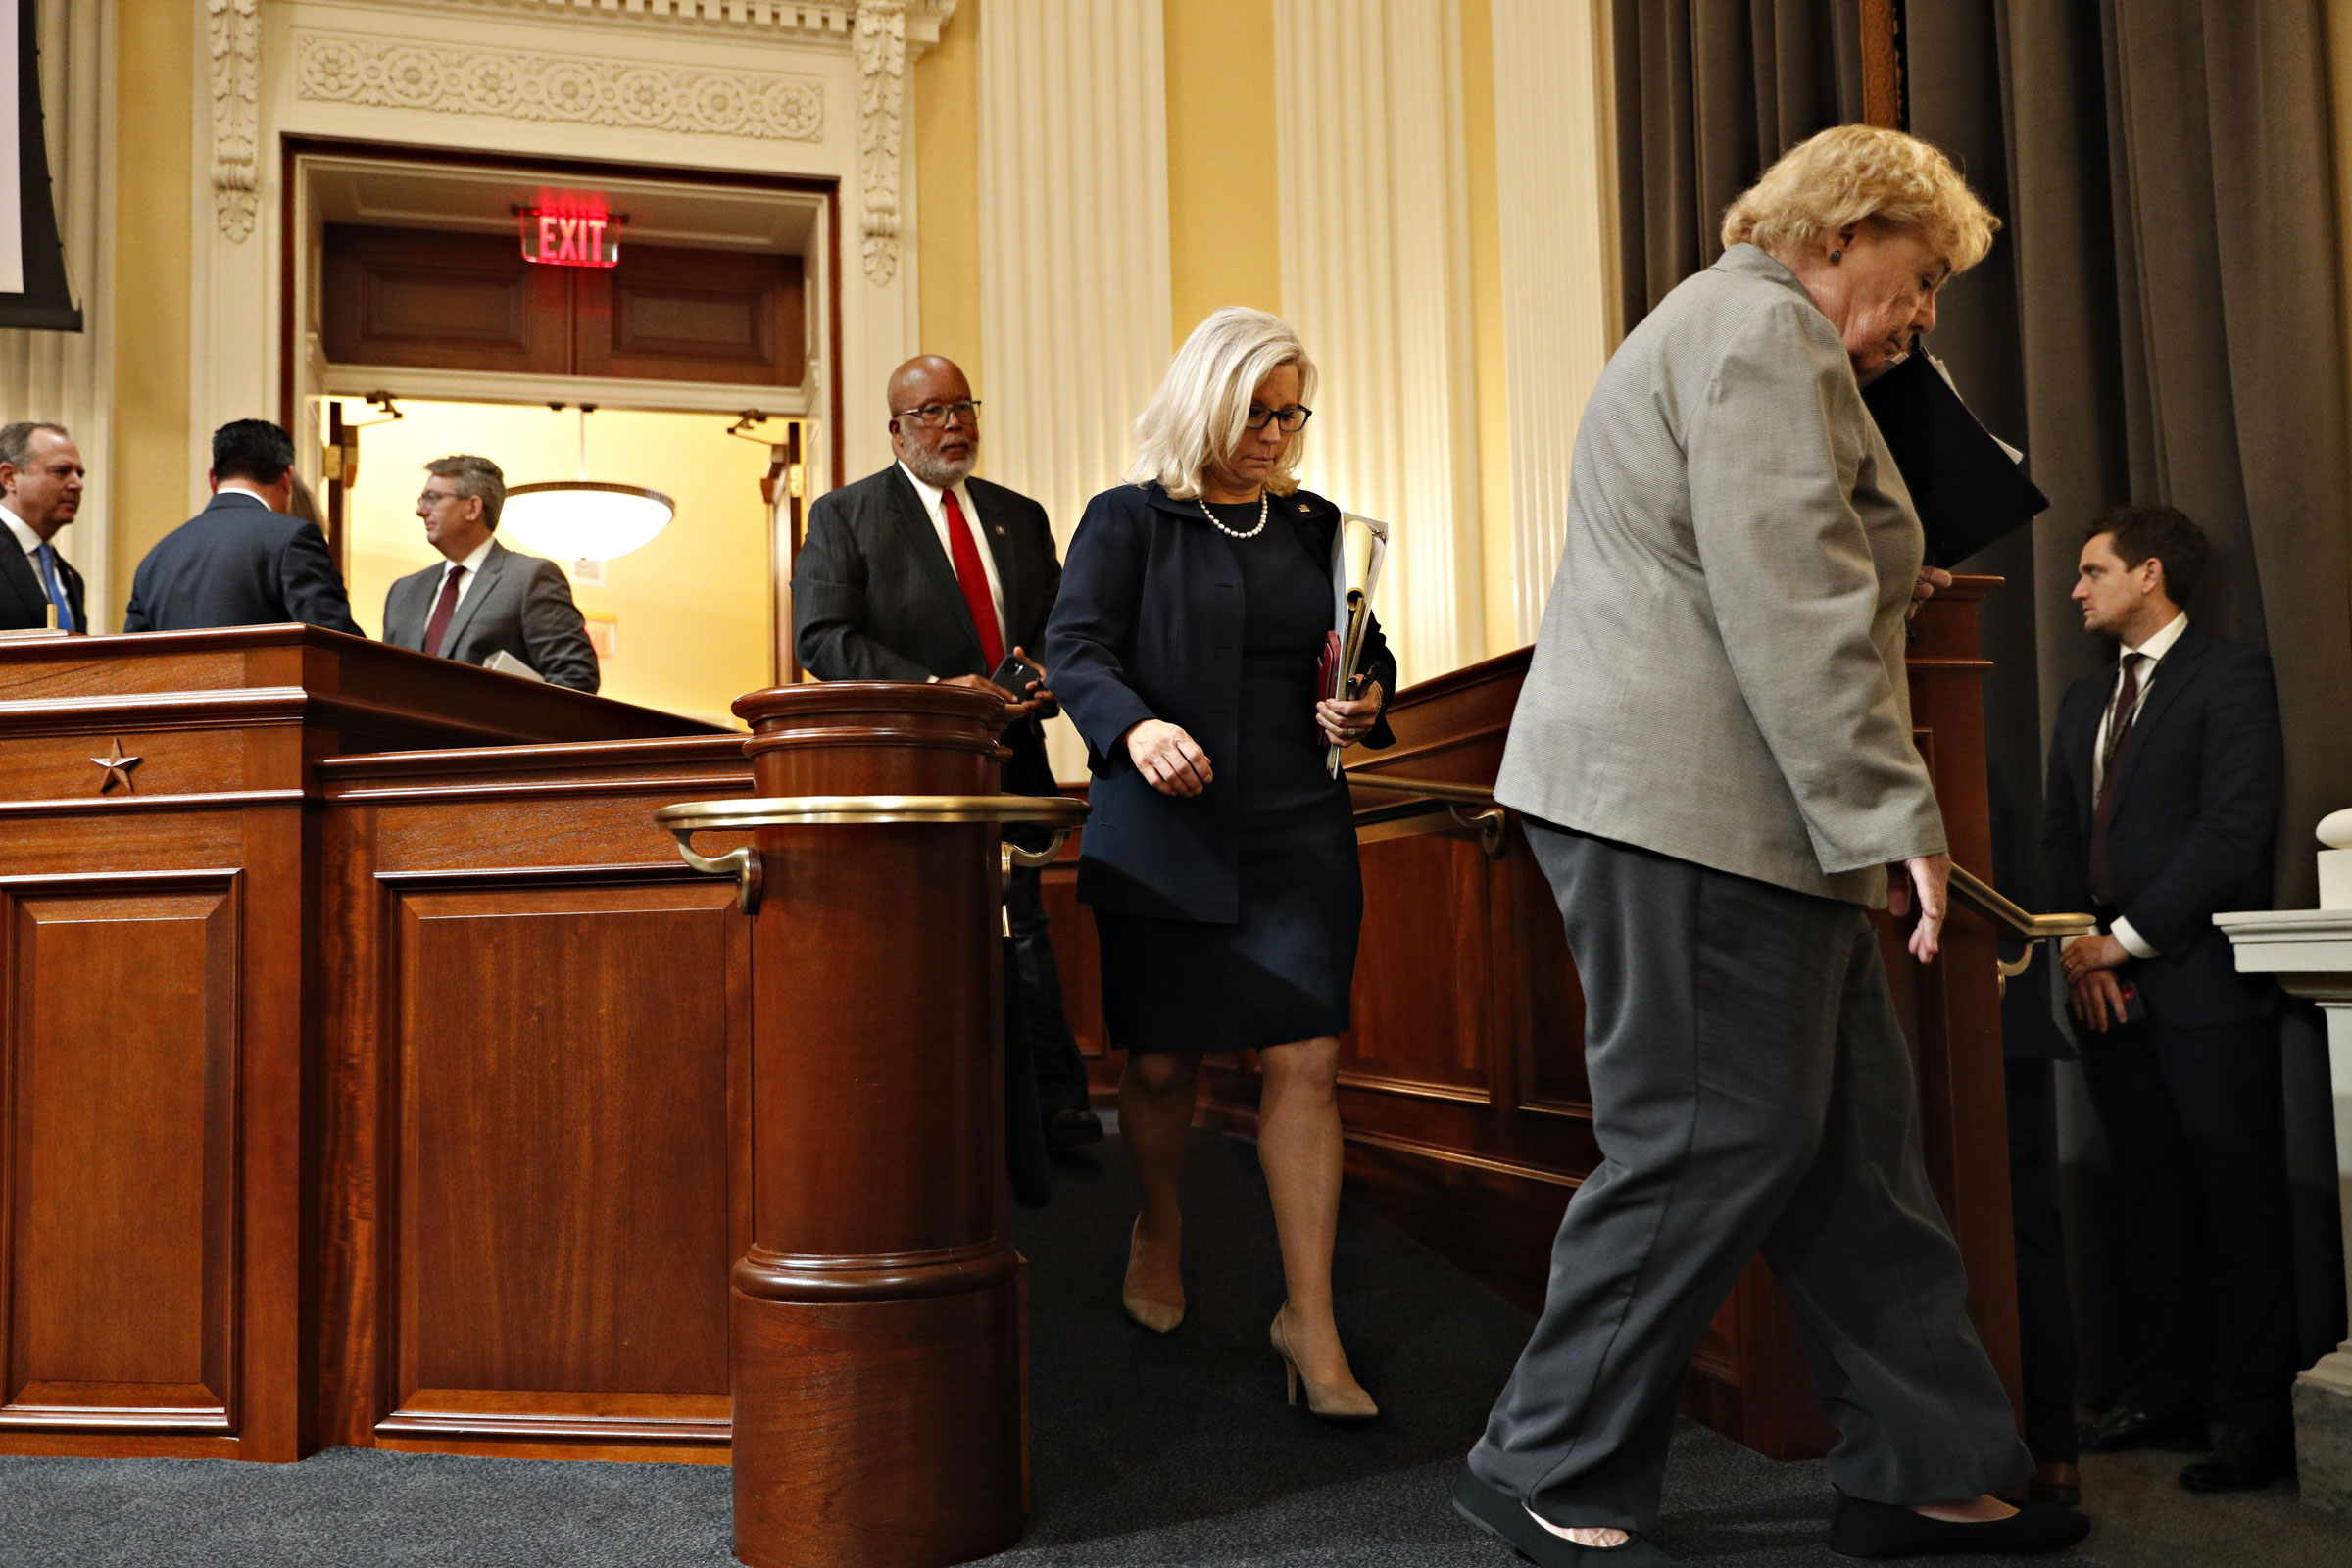 Representative Zoe Lofgren, a Democrat from California, from right, Representative Liz Cheney, a Republican from Wyoming, and chairman Representative Bernie Thompson, a Democrat from Mississippi, exit following a hearing of the Select Committee to Investigate the January 6th Attack on the US Capitol in Washington, D.C., US, on Thursday, June 16, 2022. (Tom Brenner—Bloomberg/Getty Images)